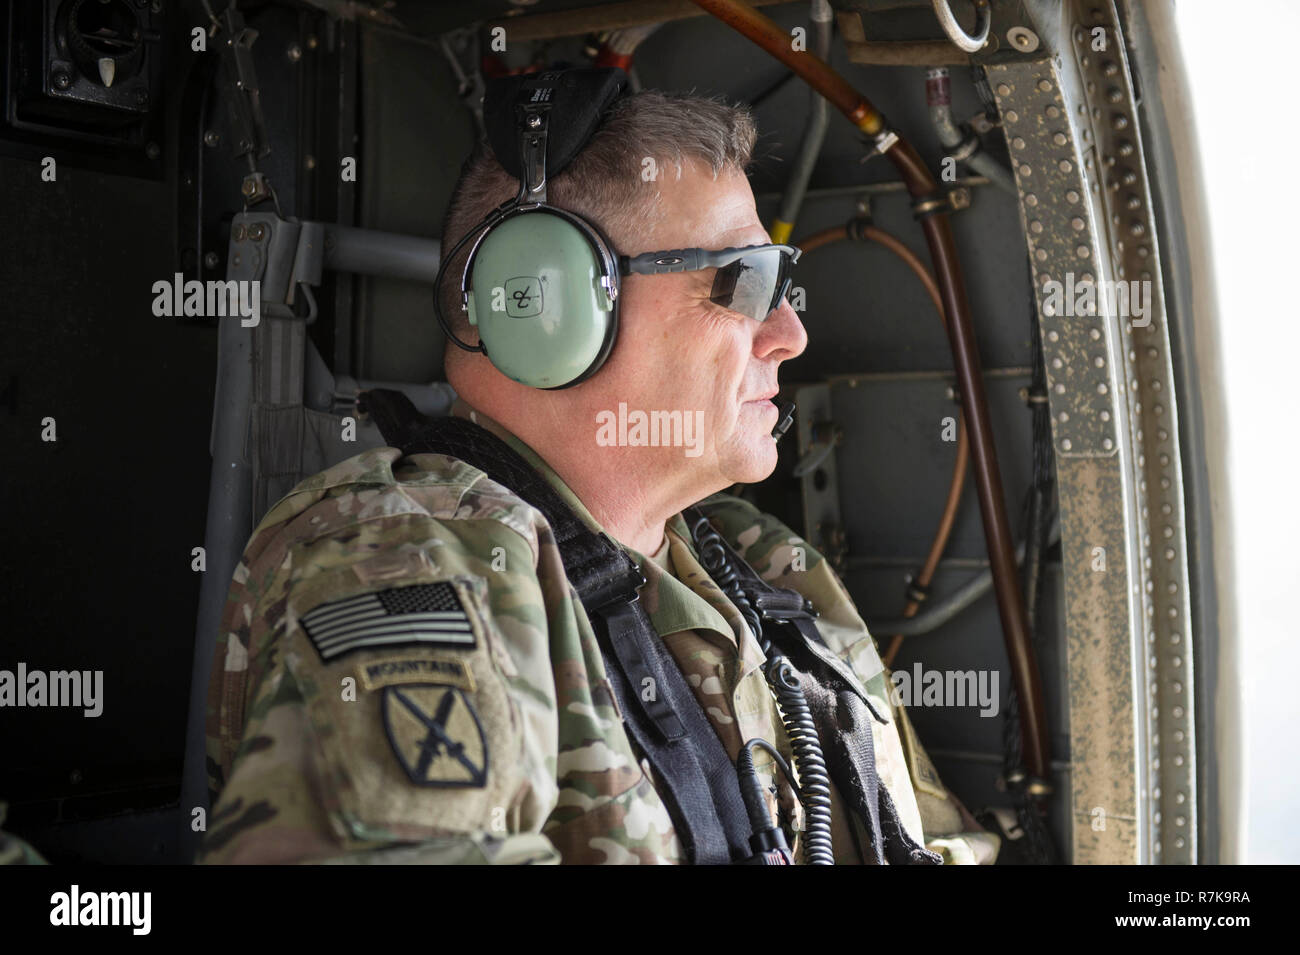 U.S. Army Chief of Staff Gen. Mark Milley looks out during a helicopter flight to receive an update briefing from leaders of the NATO Special Operations Component Command July 18, 2016 at Bagram Airfield, Afghanistan. Milley was chosen by President Donald Trump on December 8, 2018 to be the next Chairman of the Joint Chiefs. Stock Photo